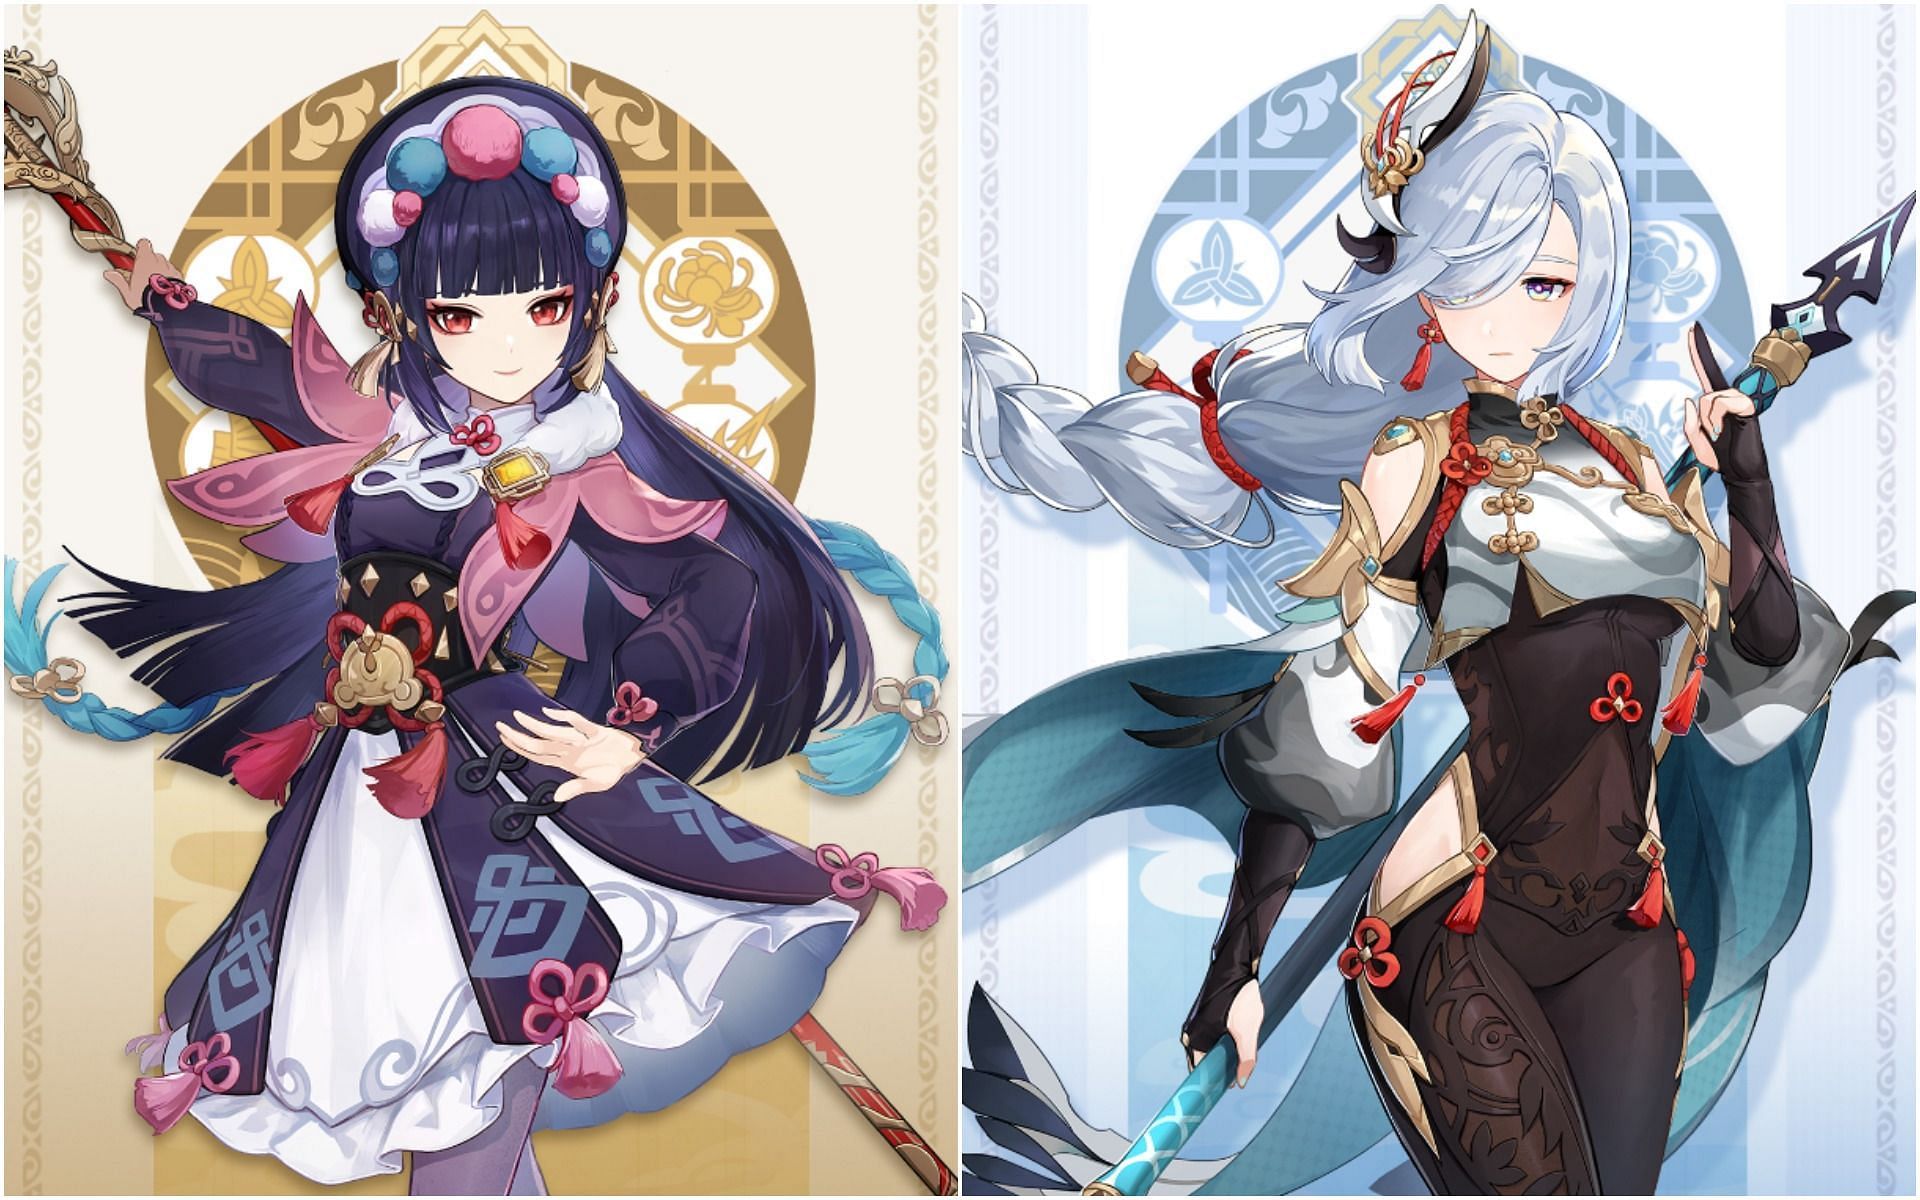 Genshin Impact 2.4 update: Yun Jin and Shenhe banner release dates for all regions